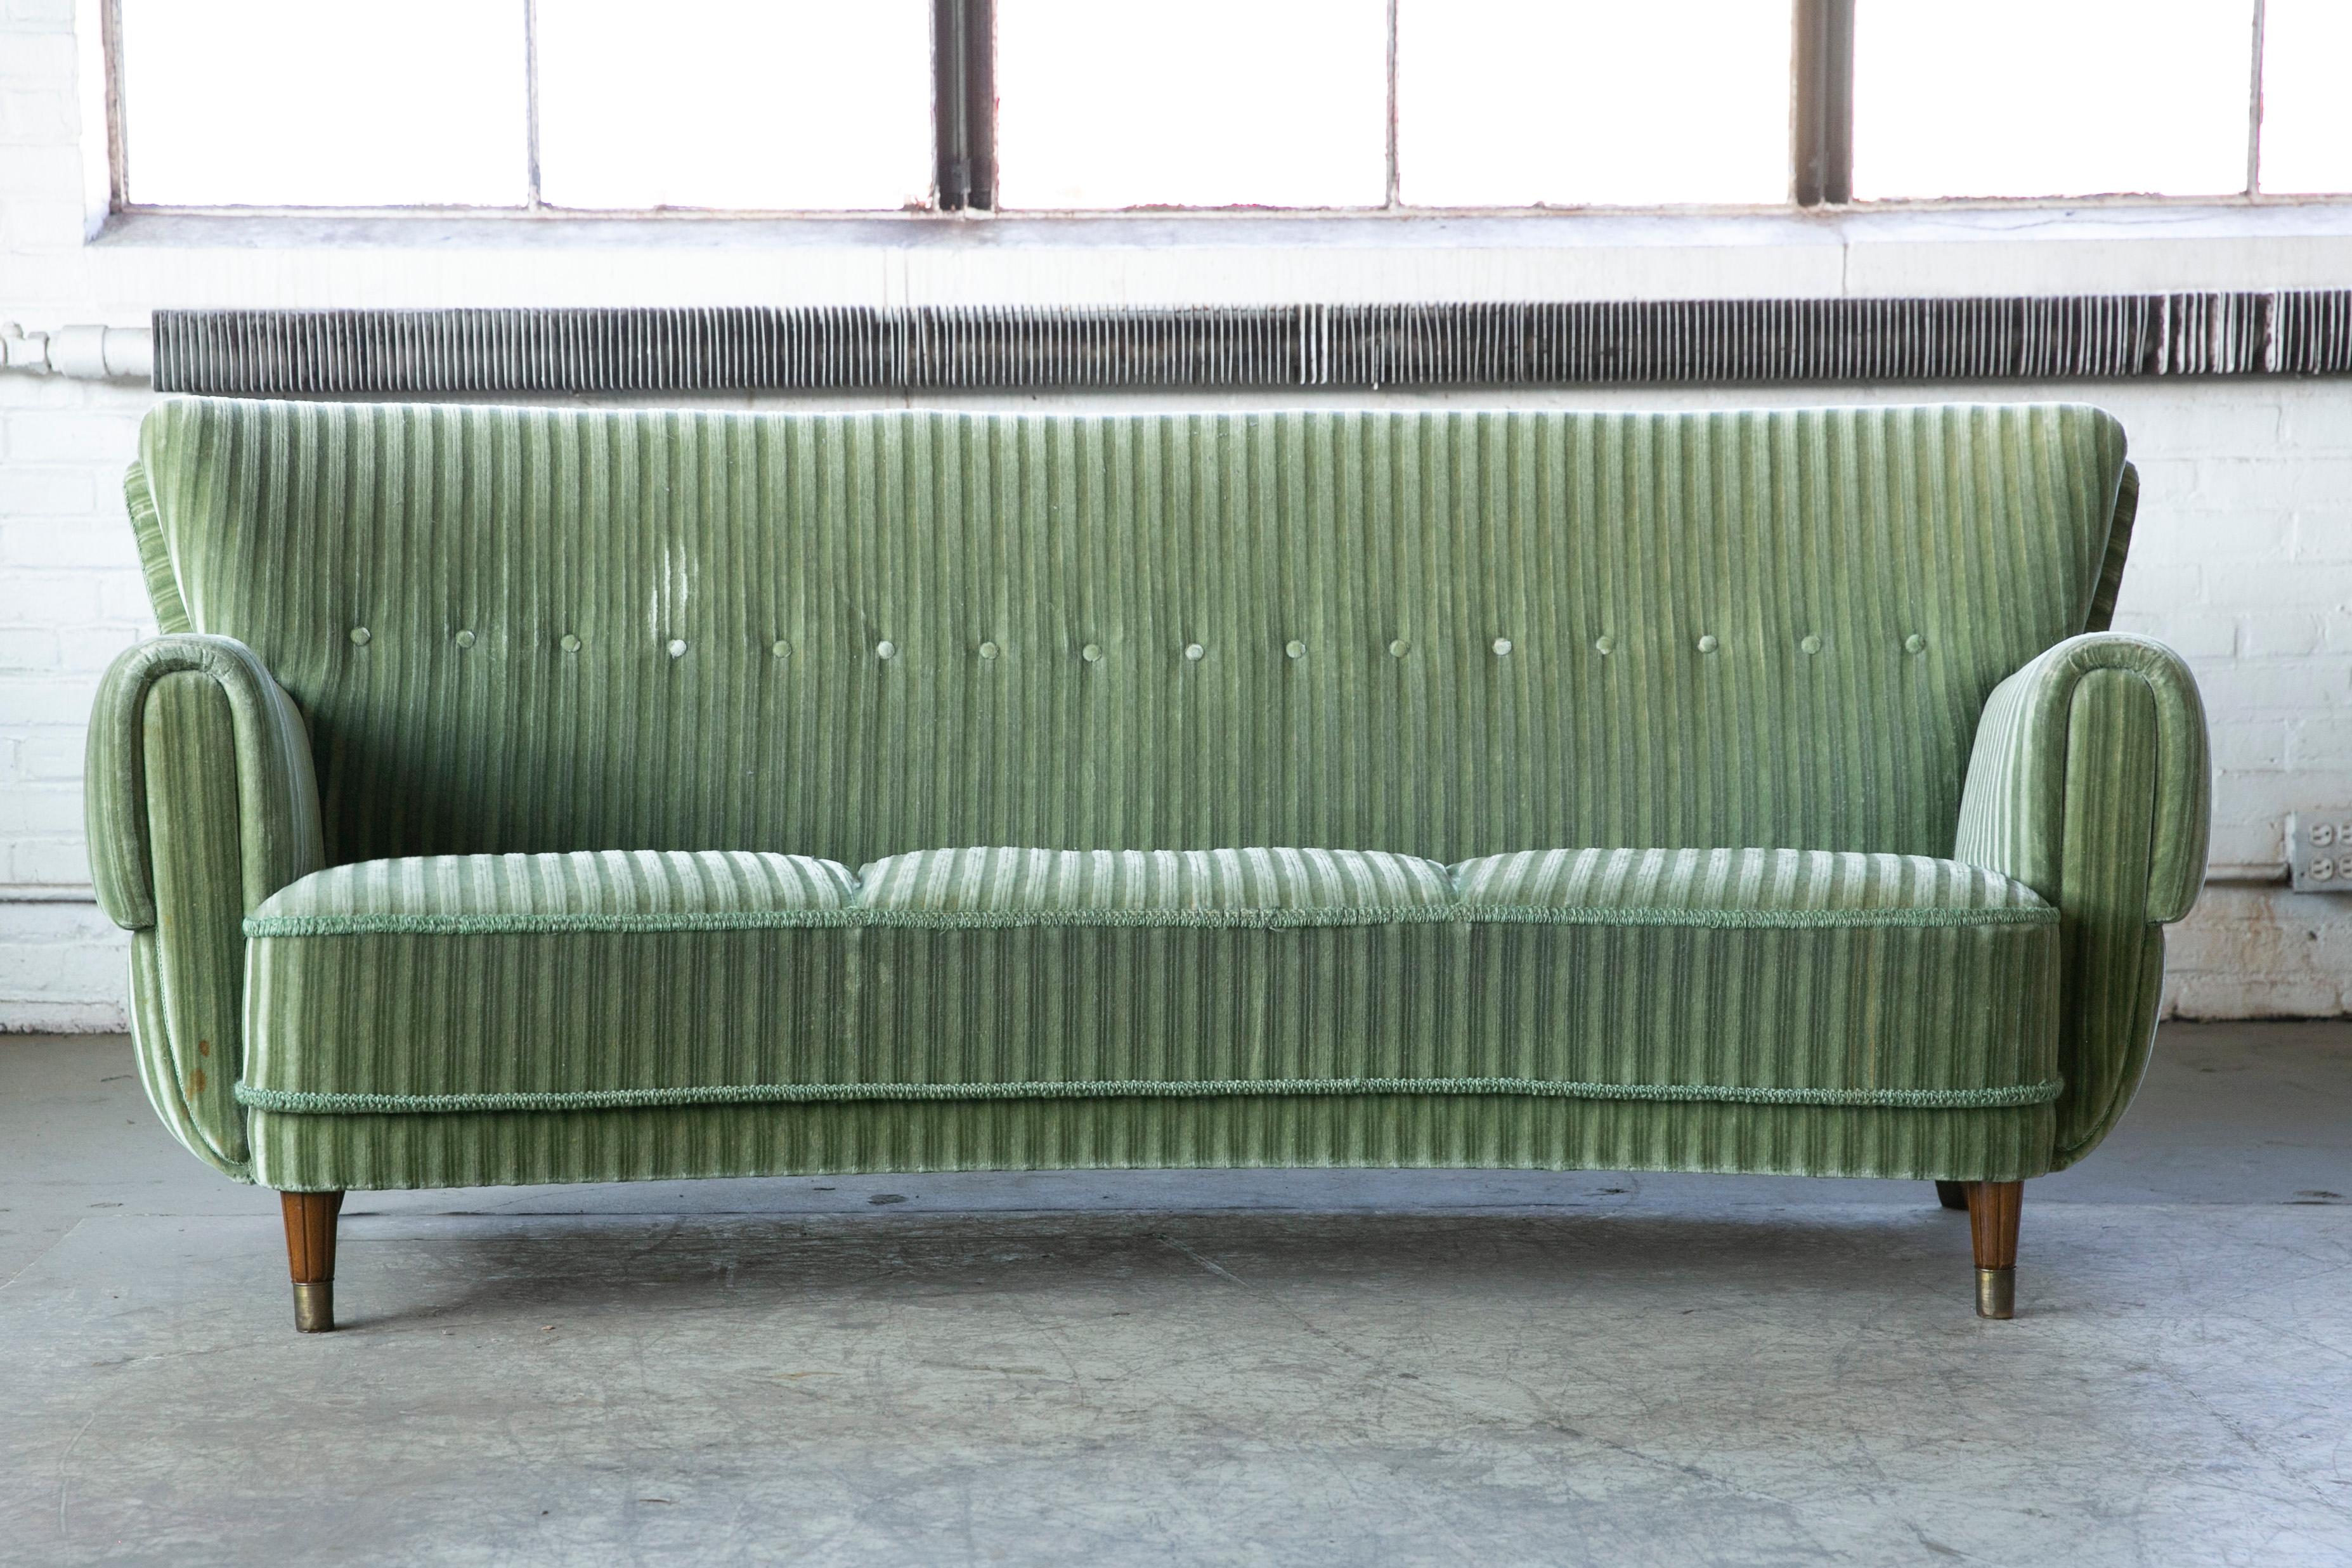 Beautiful and very elegant late 1940s to early 1950's curved three-seat sofa in green mohair wool fabric. The sofa has springs in the seat and the backrest and the cushions are nice and firm and the sofa solid sturdy. The original mohair fabric is